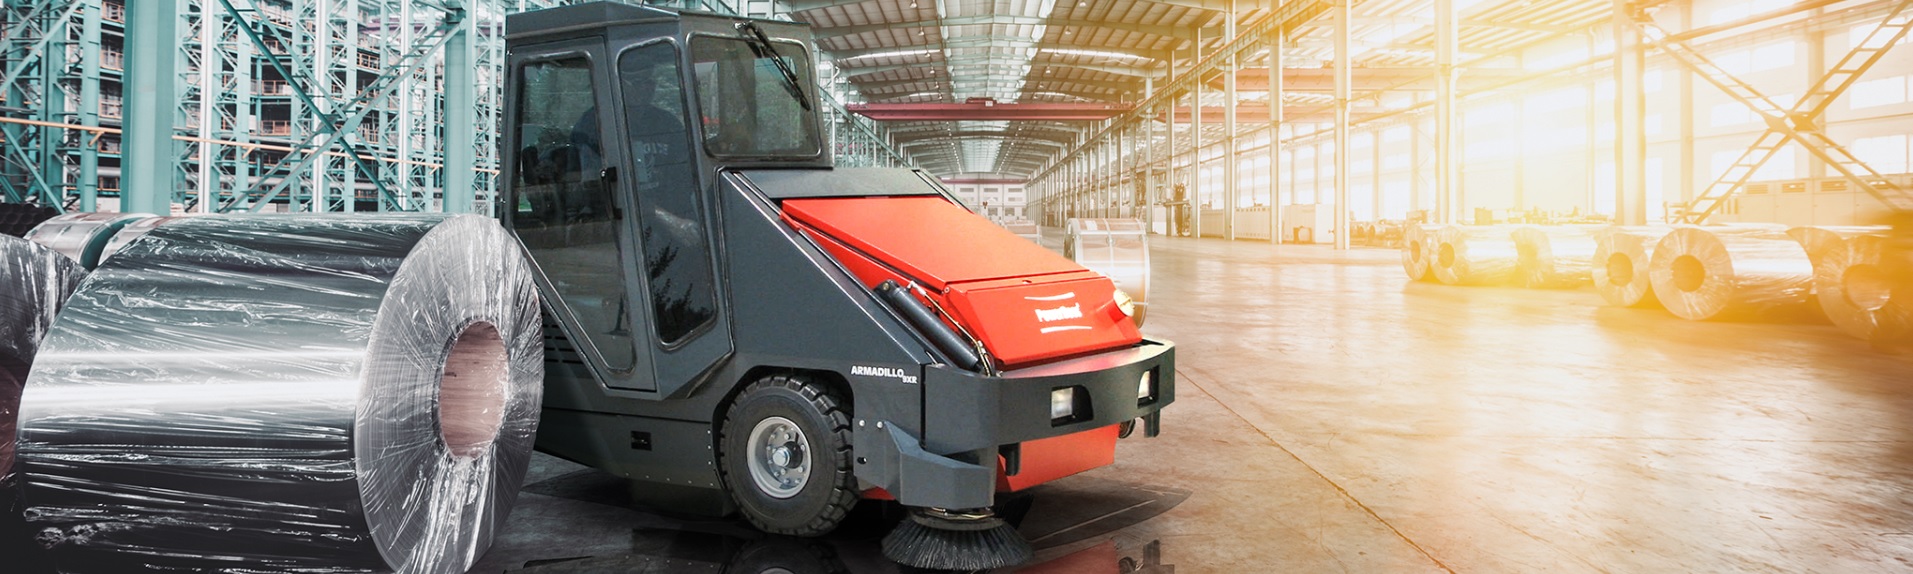 PowerBoss Armadillo 9X Sweeper Features Overview